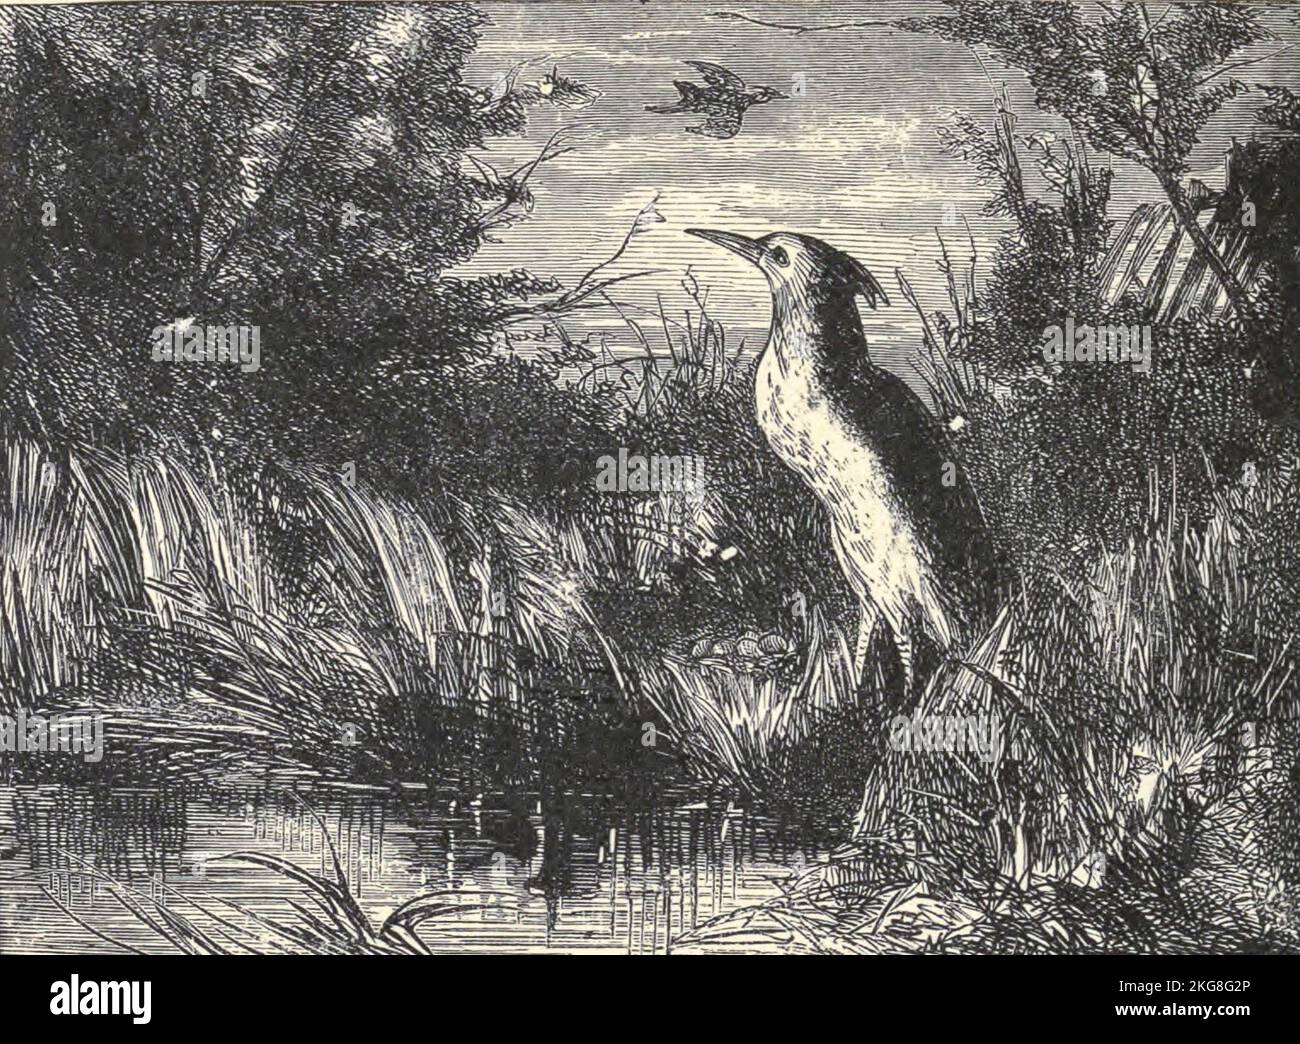 Along thy glades, a solitary guest. The hollow-sounding bittern guaras its nest Illustration by Hammatt Billings from the poem The Deserted Village by Oliver Goldsmith published in 1882. The Deserted Village is a poem by Oliver Goldsmith published in 1770. It is a work of social commentary, and condemns rural depopulation and the pursuit of excessive wealth. Oliver Goldsmith (10 November 1728 – 4 April 1774) was an Anglo-Irish novelist, playwright, dramatist and poet, who is best known for his novel The Vicar of Wakefield (1766), his pastoral poem The Deserted Village (1770), and his plays The Stock Photo